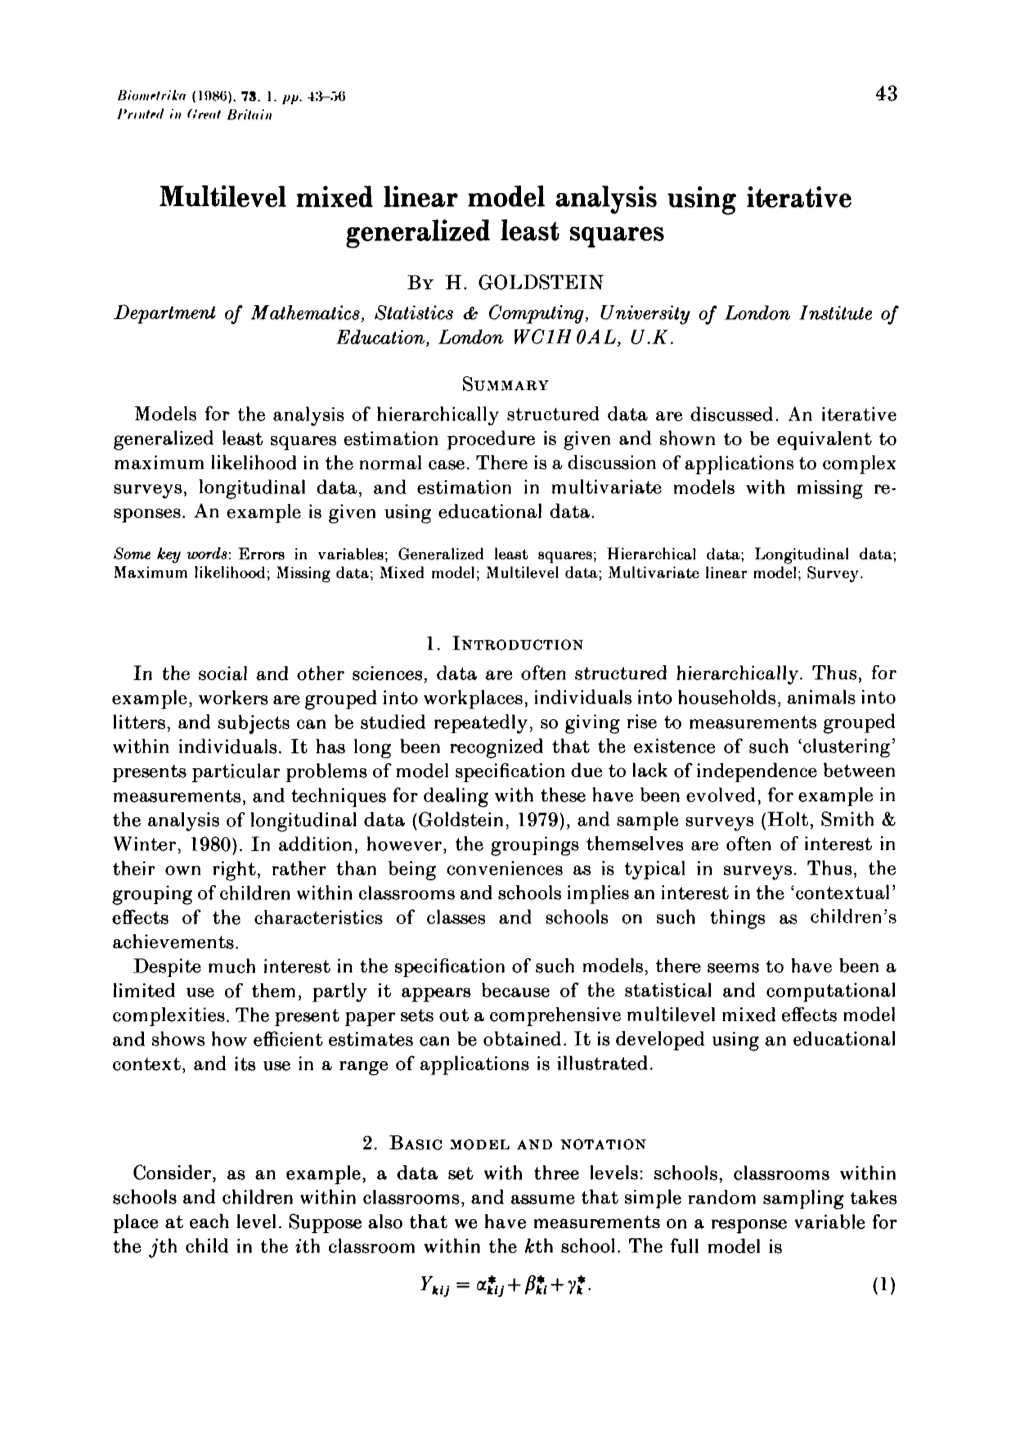 Multilevel Mixed Linear Model Analysis Using Iterative Generalized Least Squares